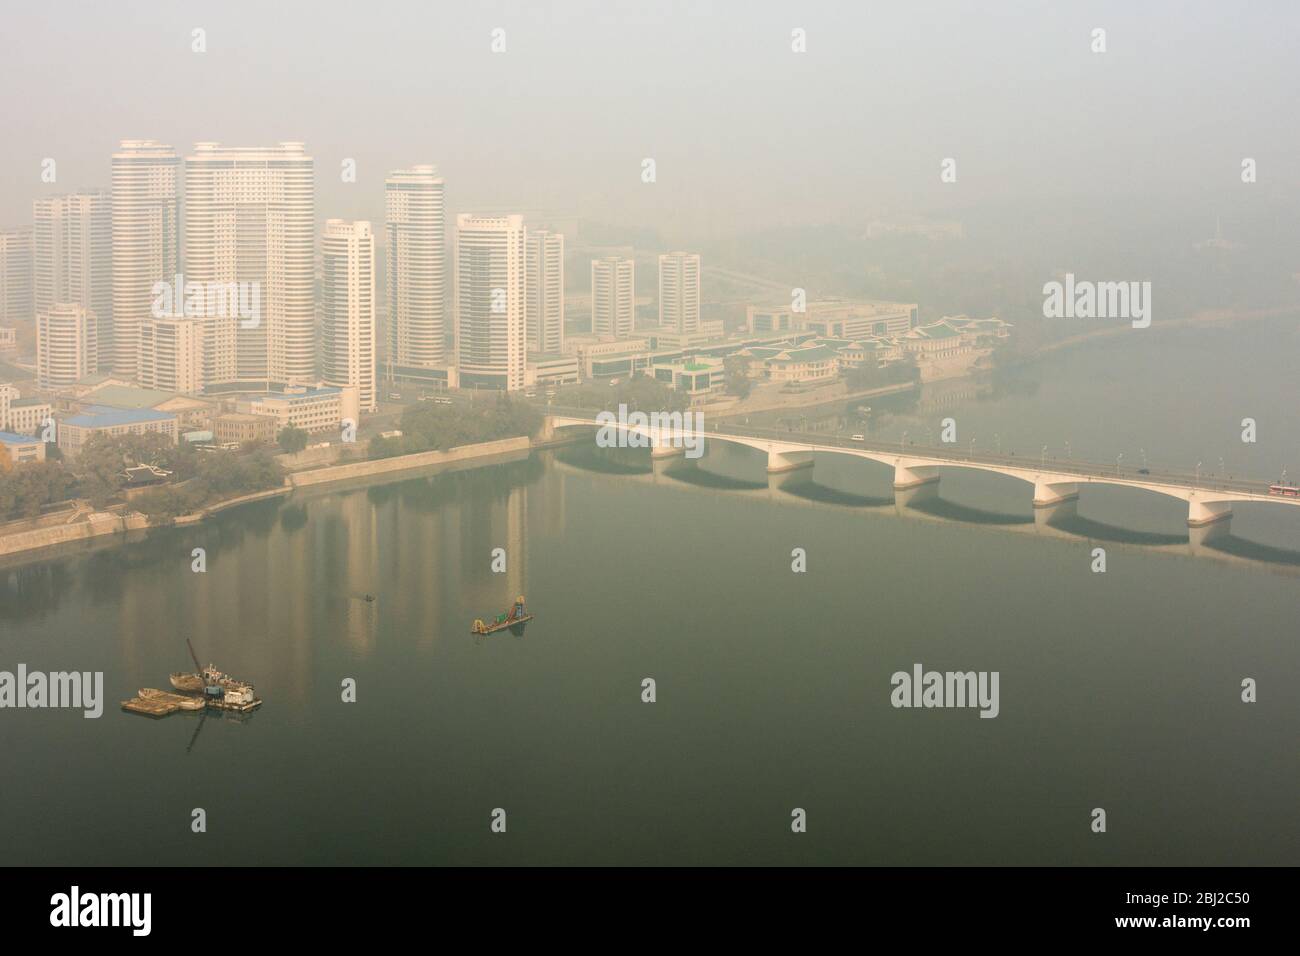 Pyongyang / DPR Korea - November 10, 2015: Pyongyang skyline with new Changjon Apartment Complex and the Taedong River on a foggy day in Pyongyang, No Stock Photo